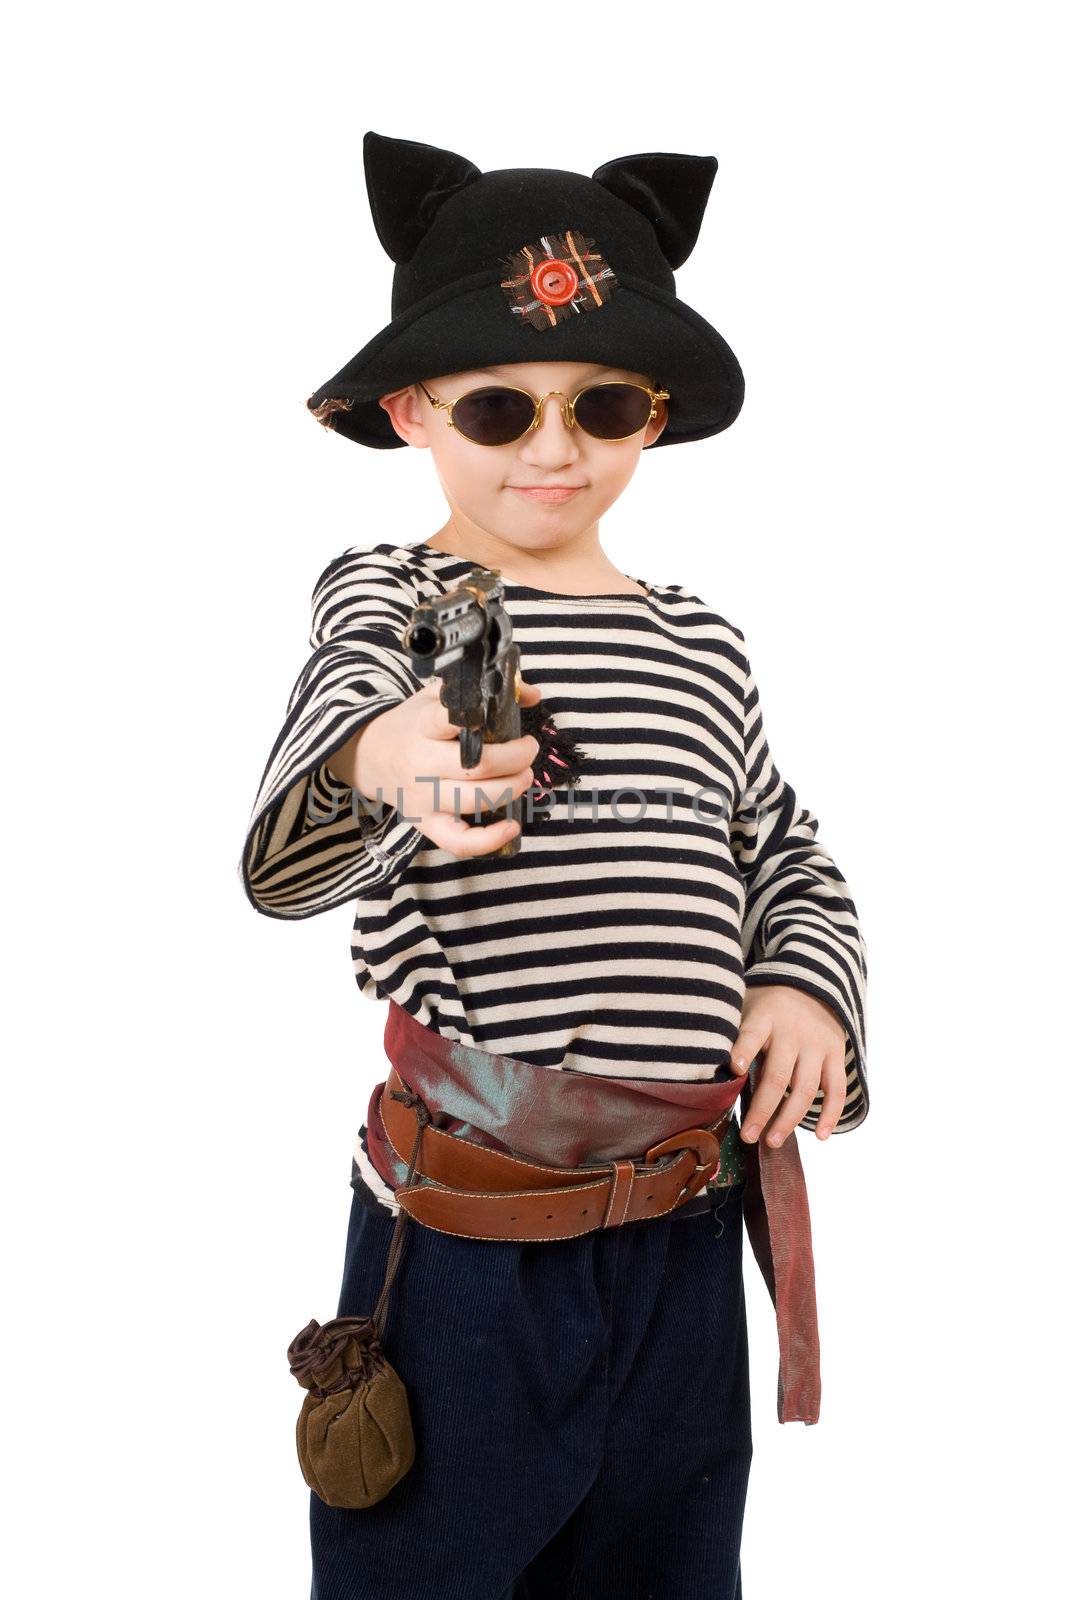 Portrait of a boy dressed as pirate by acidgrey